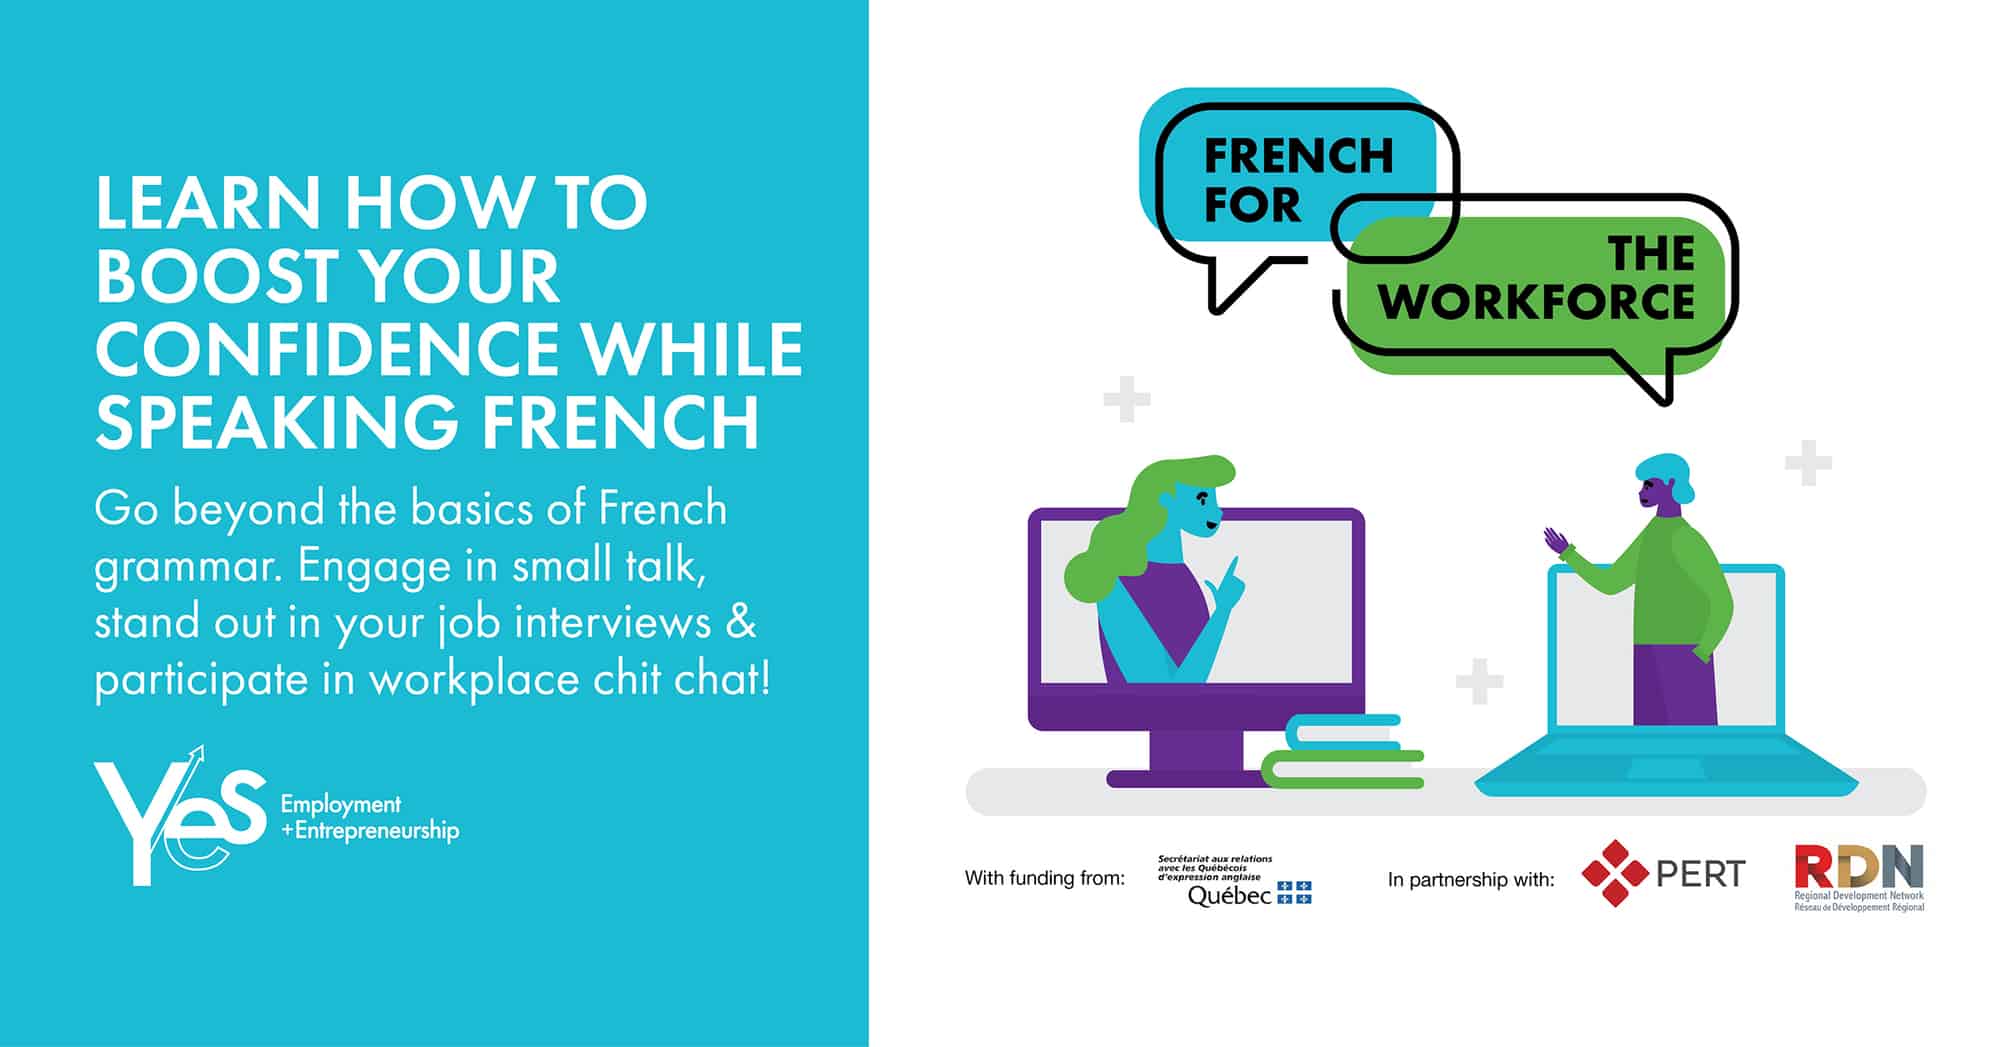 Learn how to boost your confidence while speaking French